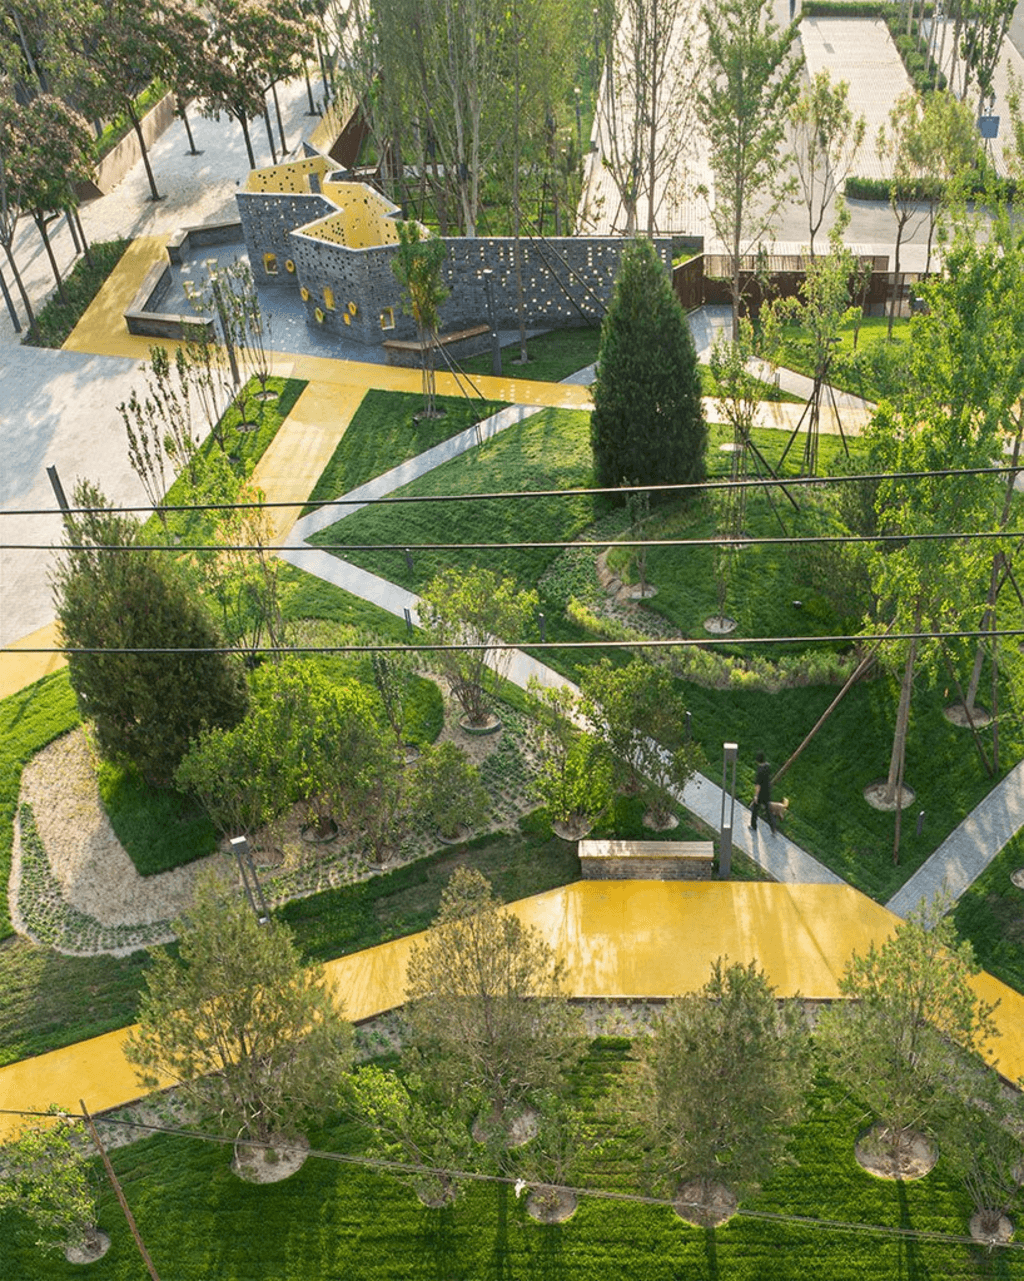 Urban Park Micro Renovation by Atelier cnS + School of Architecture